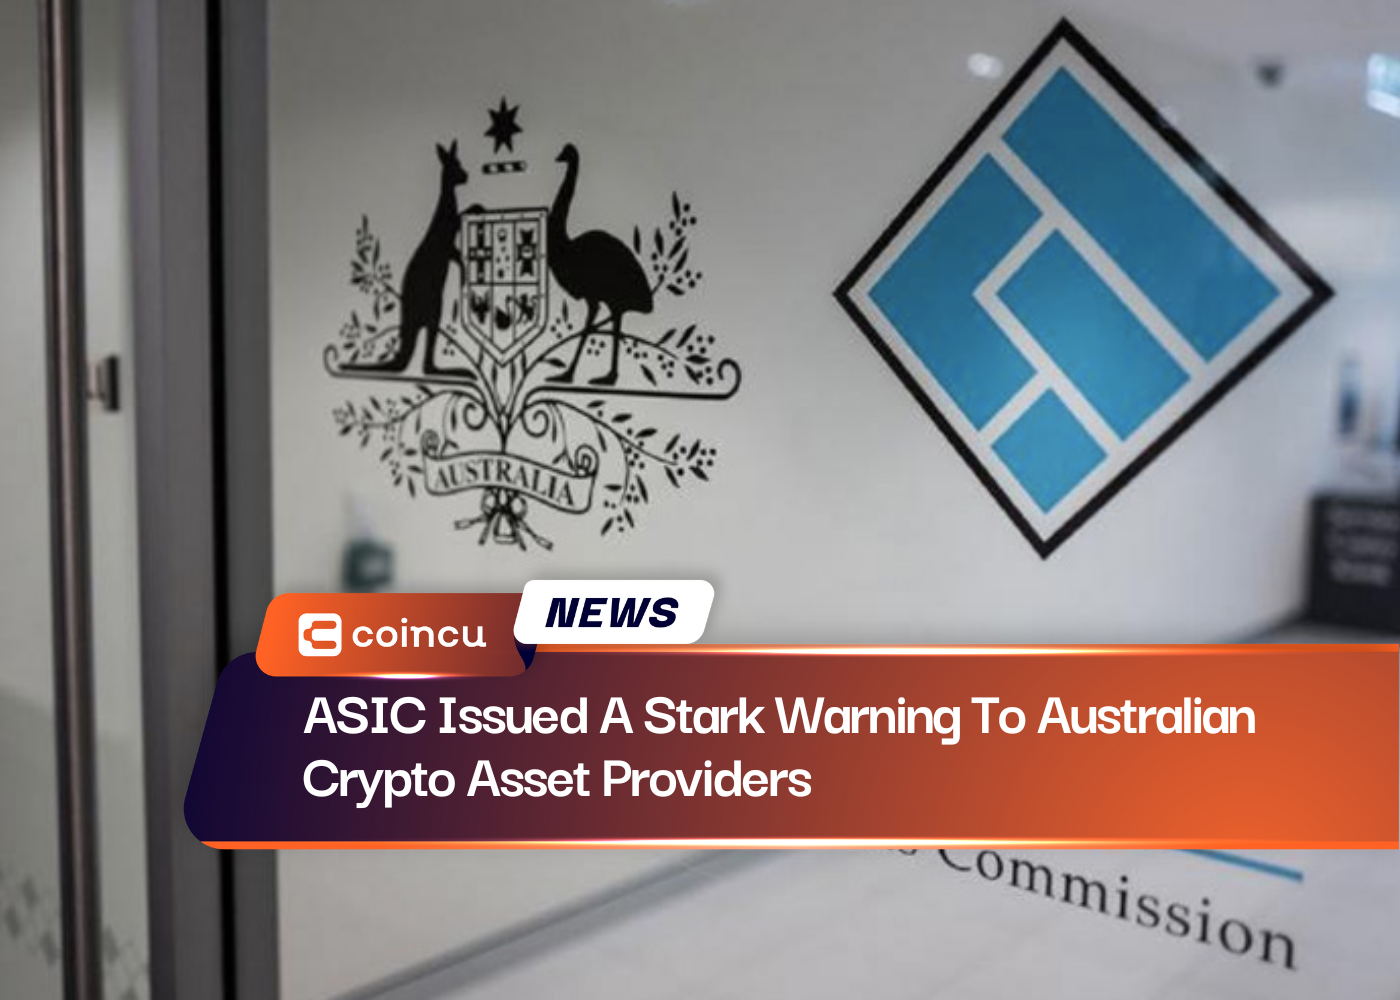 ASIC Issued A Stark Warning To Australian Crypto Asset Providers